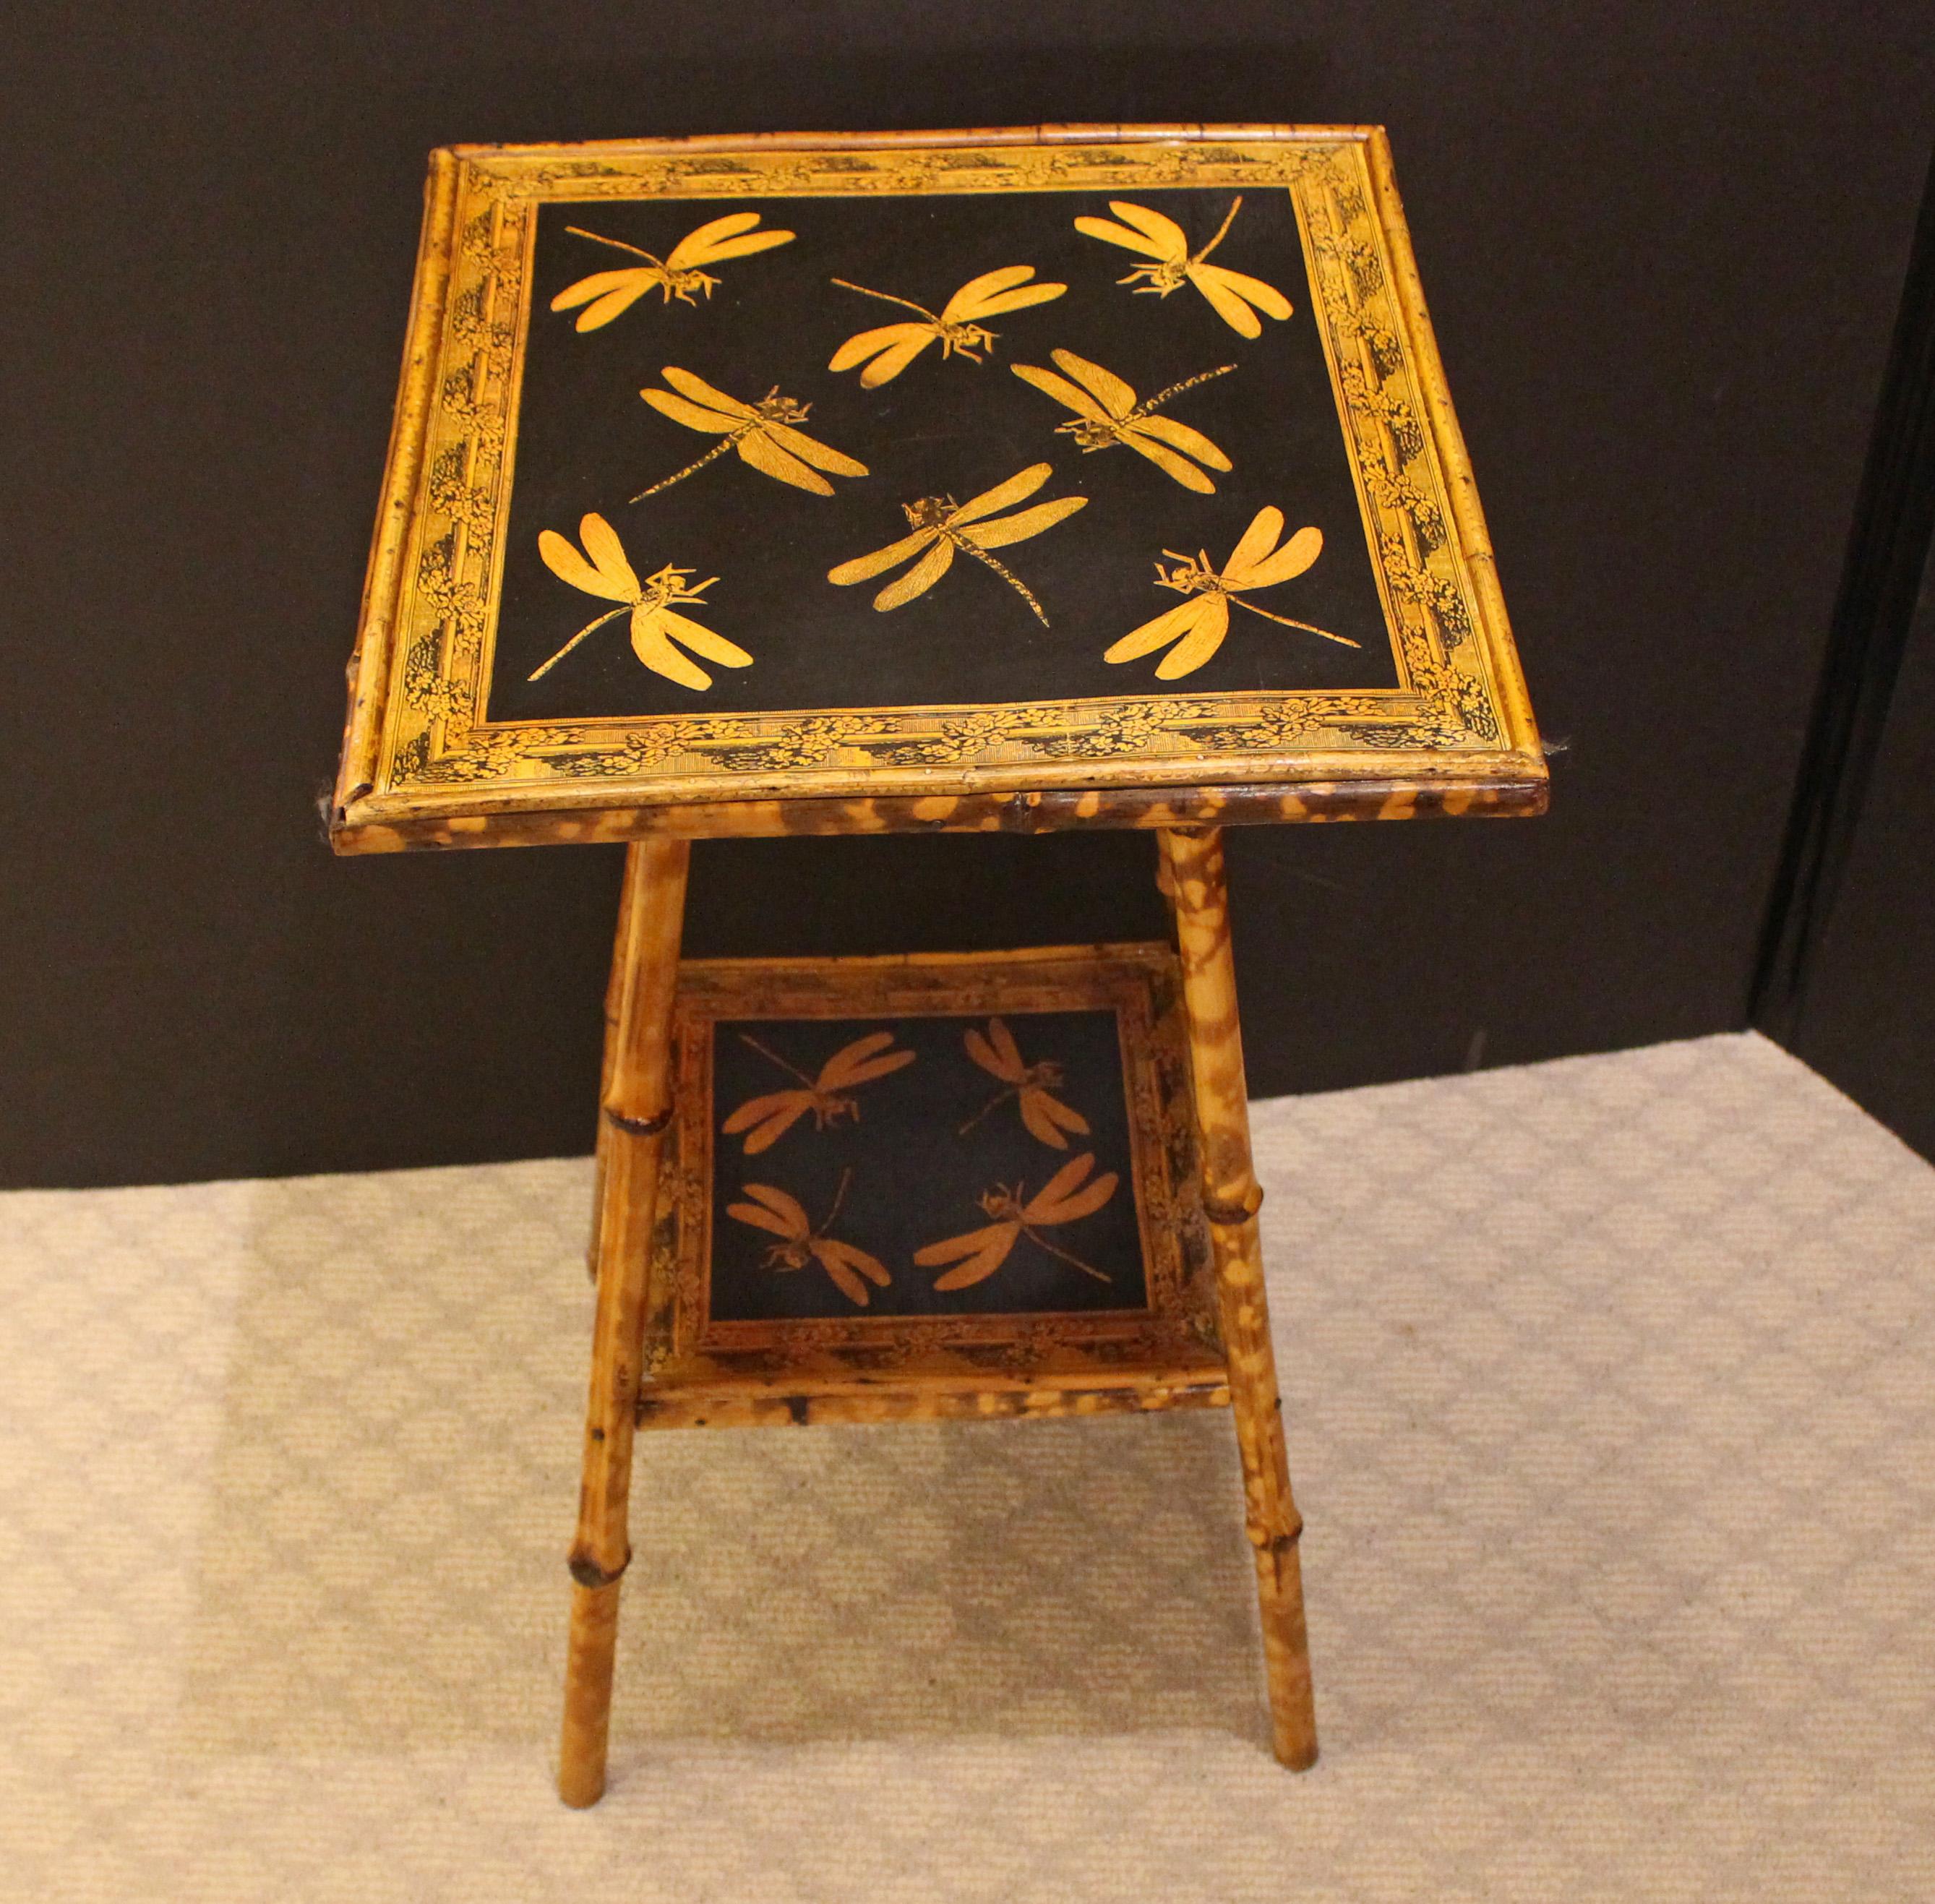 Circa 1880 English 2-tier square bamboo side table. Now decoupaged with dragonflies with floral rope motif borders. Well figured bamboo and nice stance to the straight legs. 15